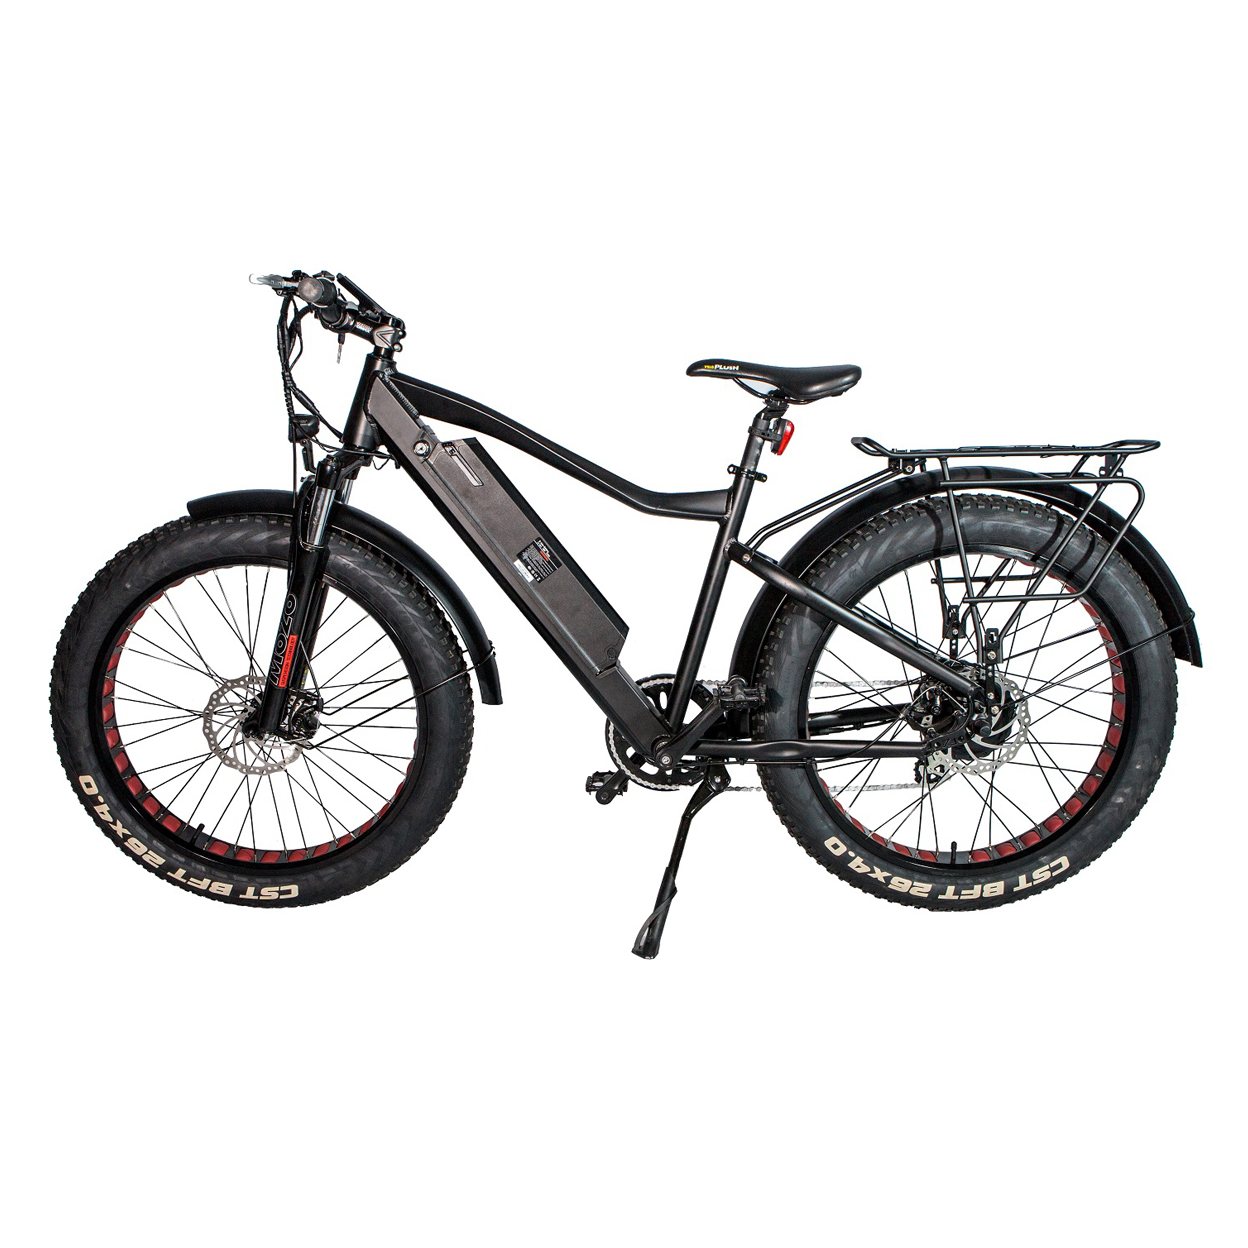 Ten best ways to use electric bicycles!